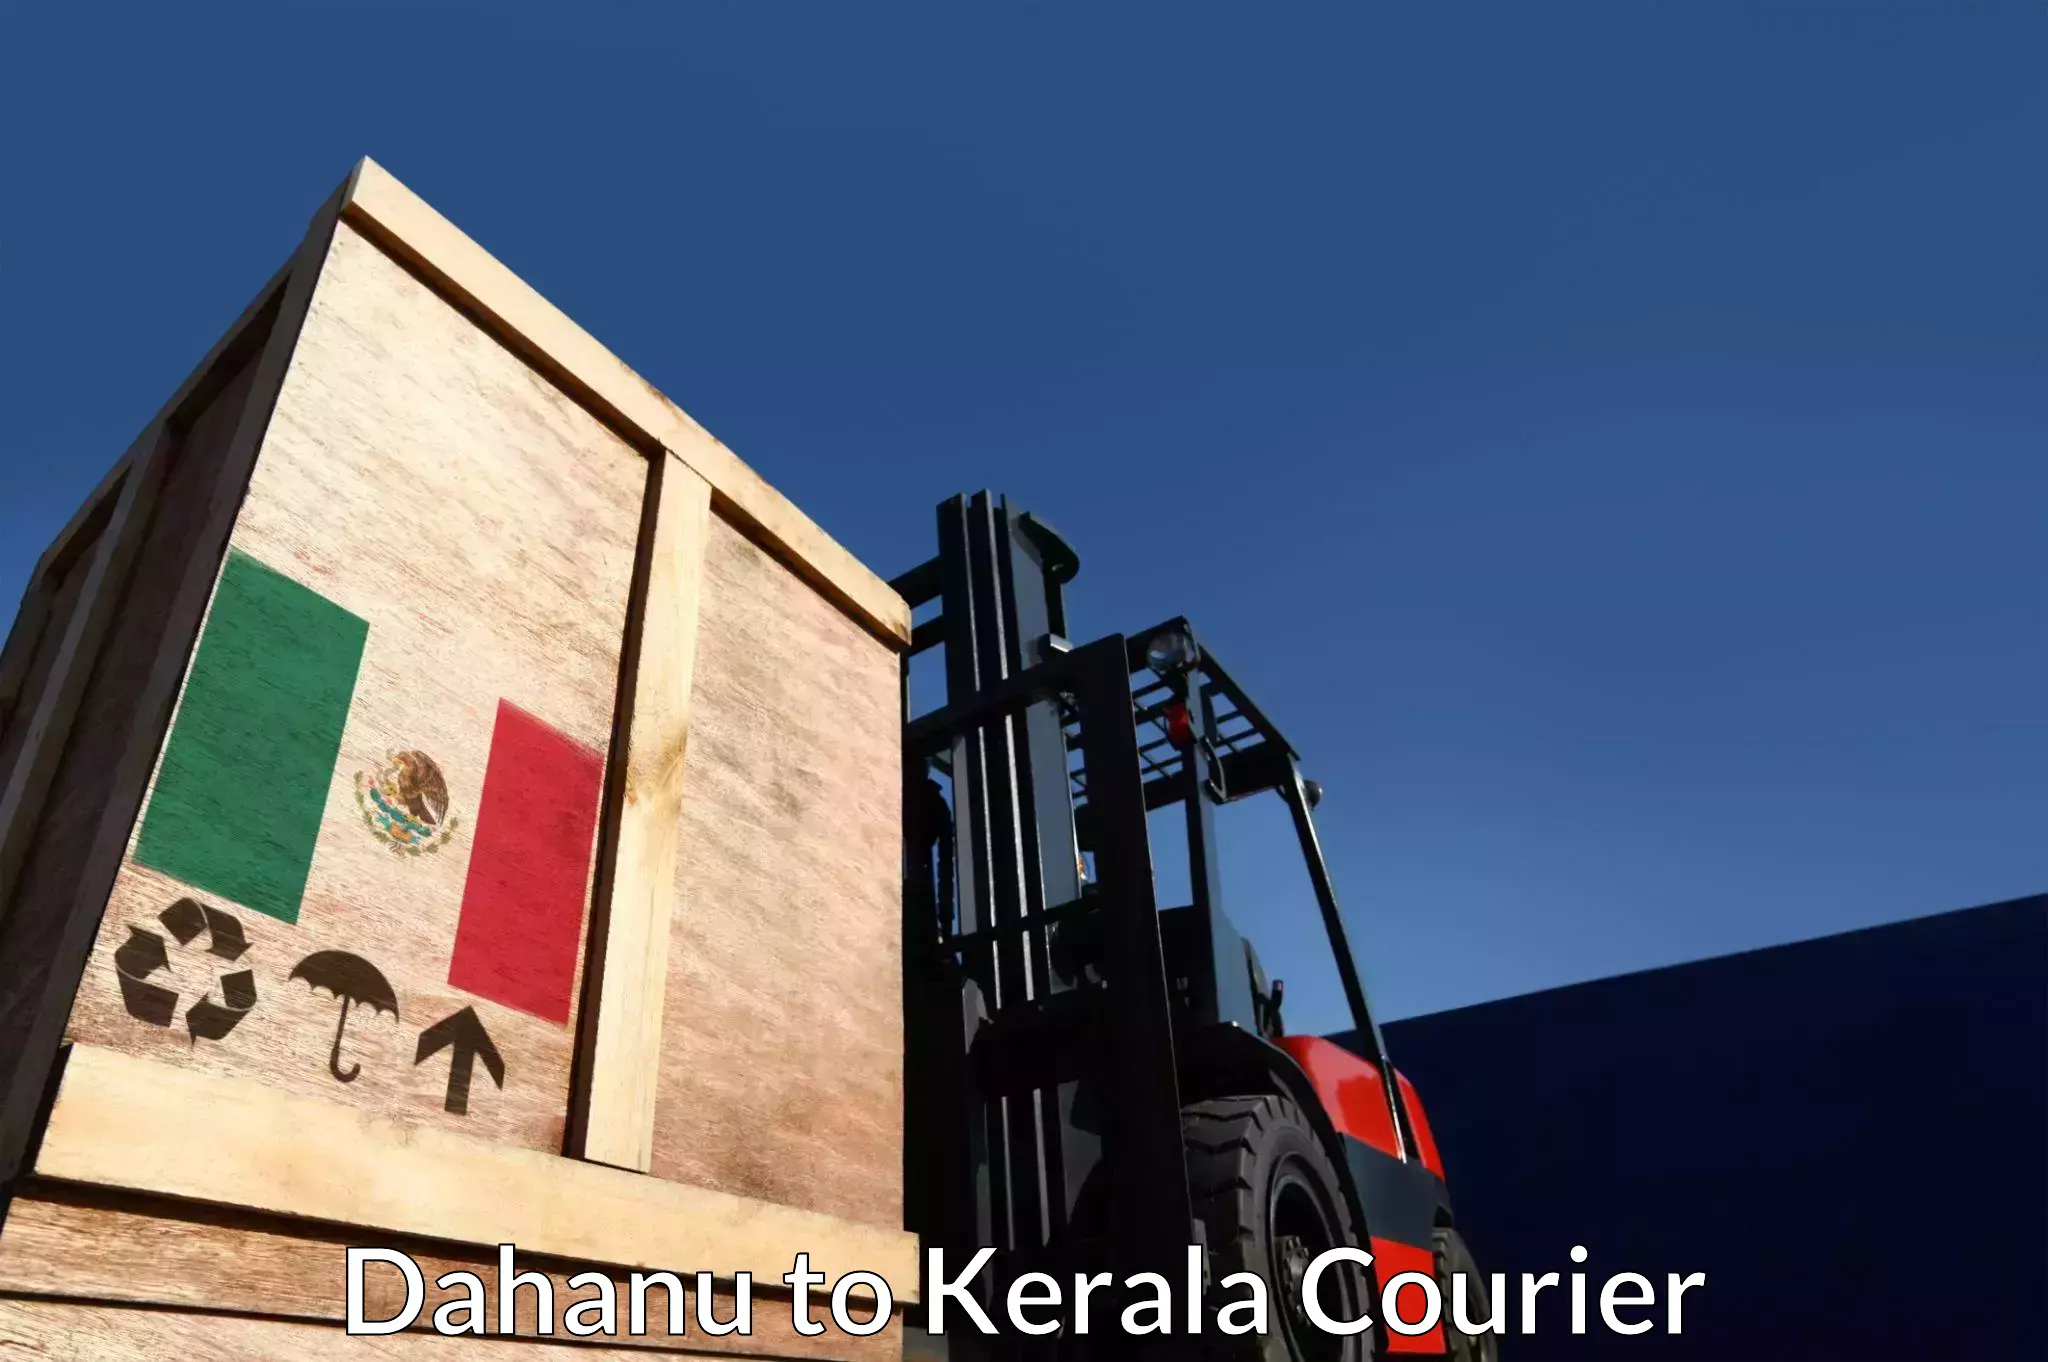 State-of-the-art courier technology Dahanu to Kuttikol